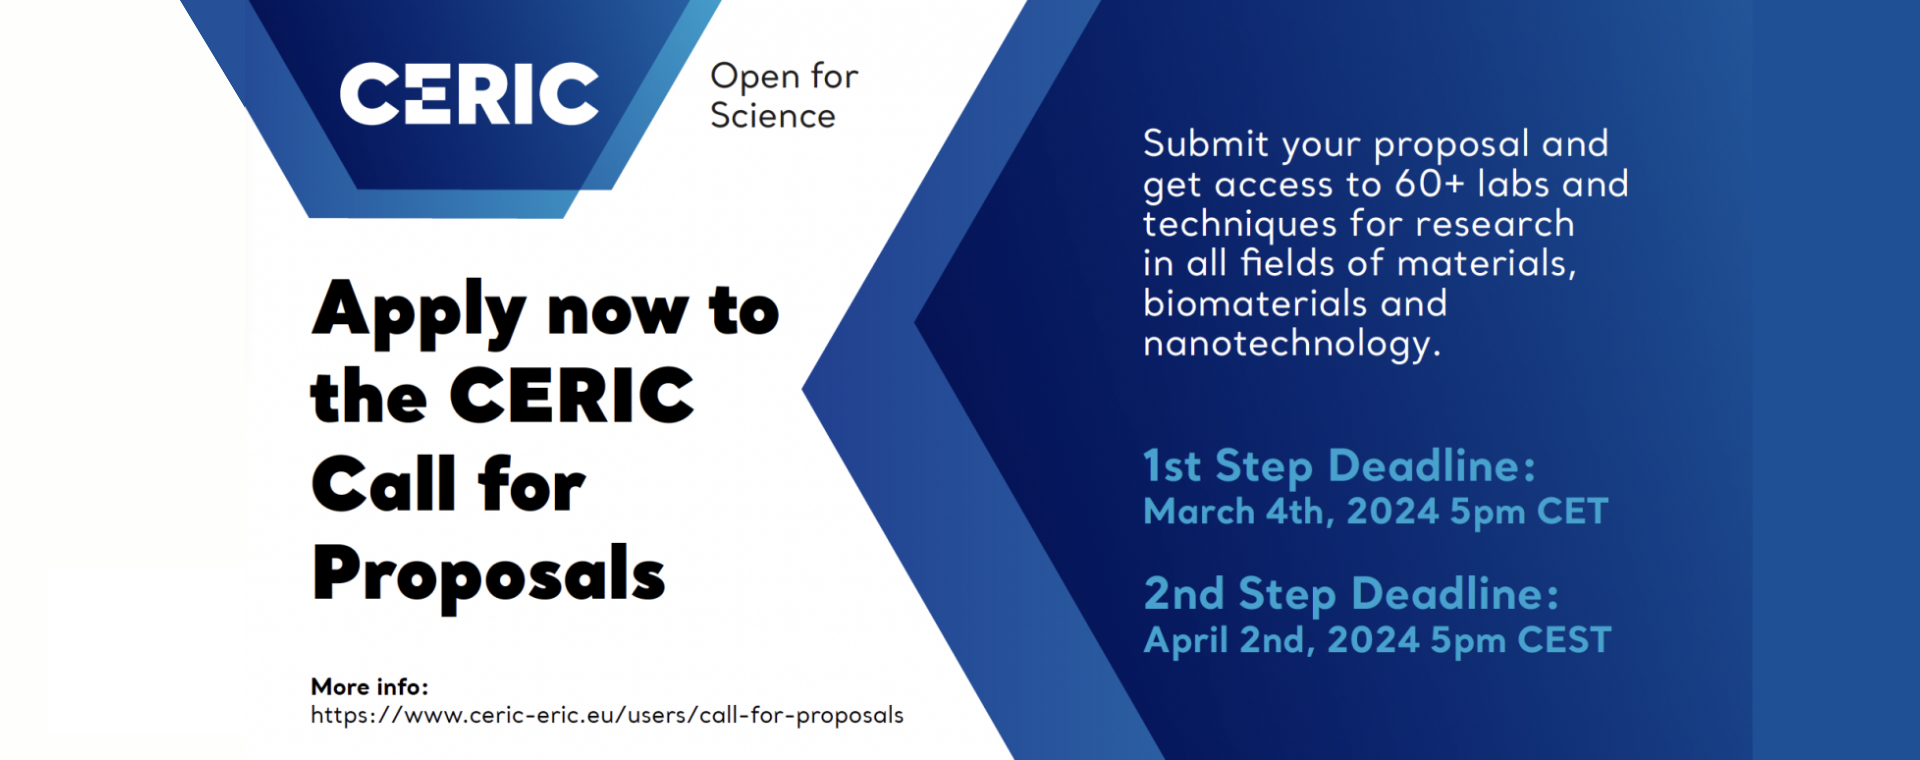 20th CERIC Call for Proposals now OPEN